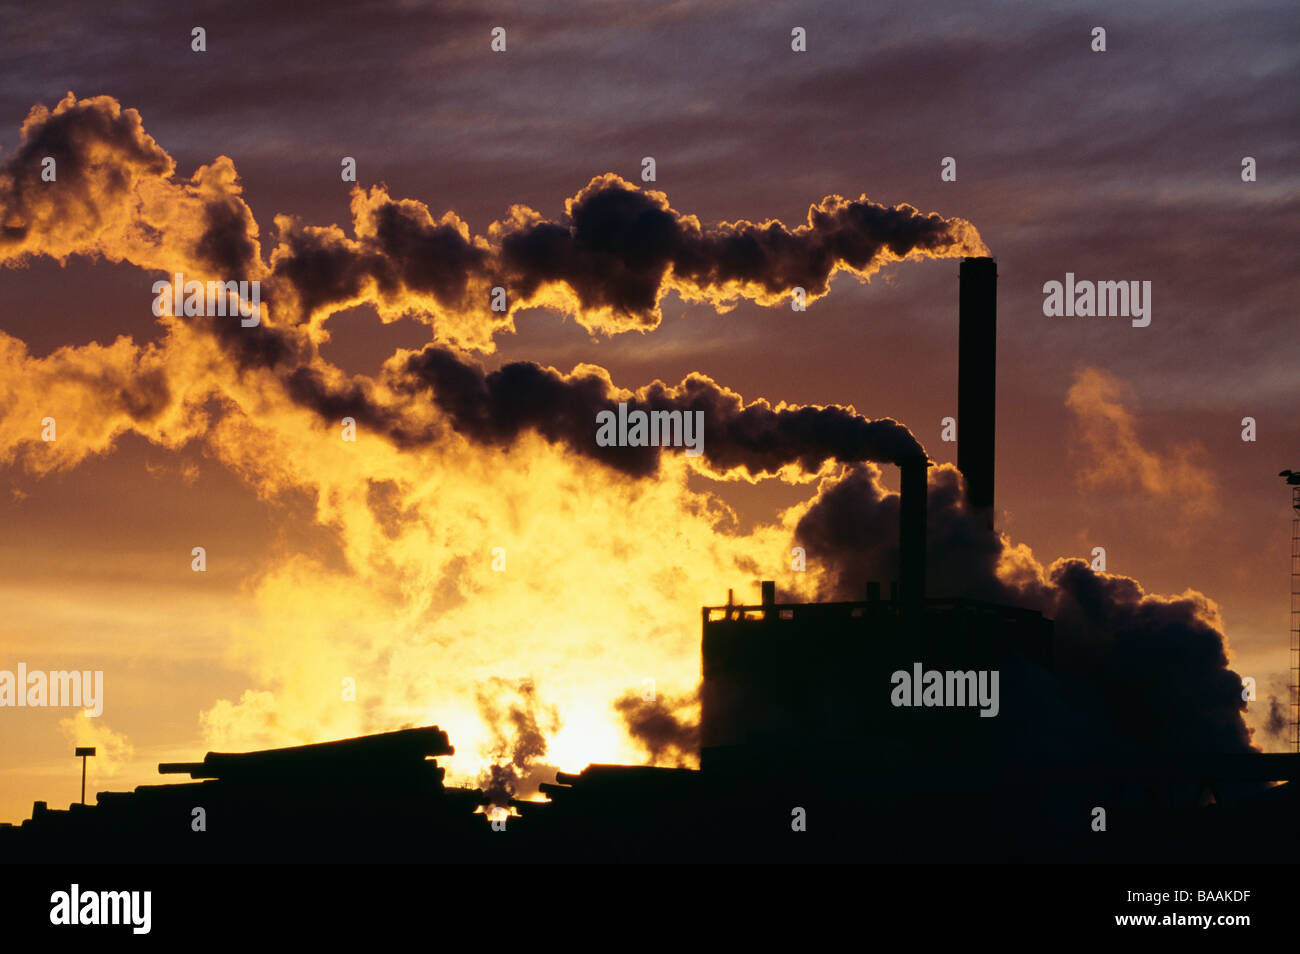 Smoke coming out of chimneys Stock Photo